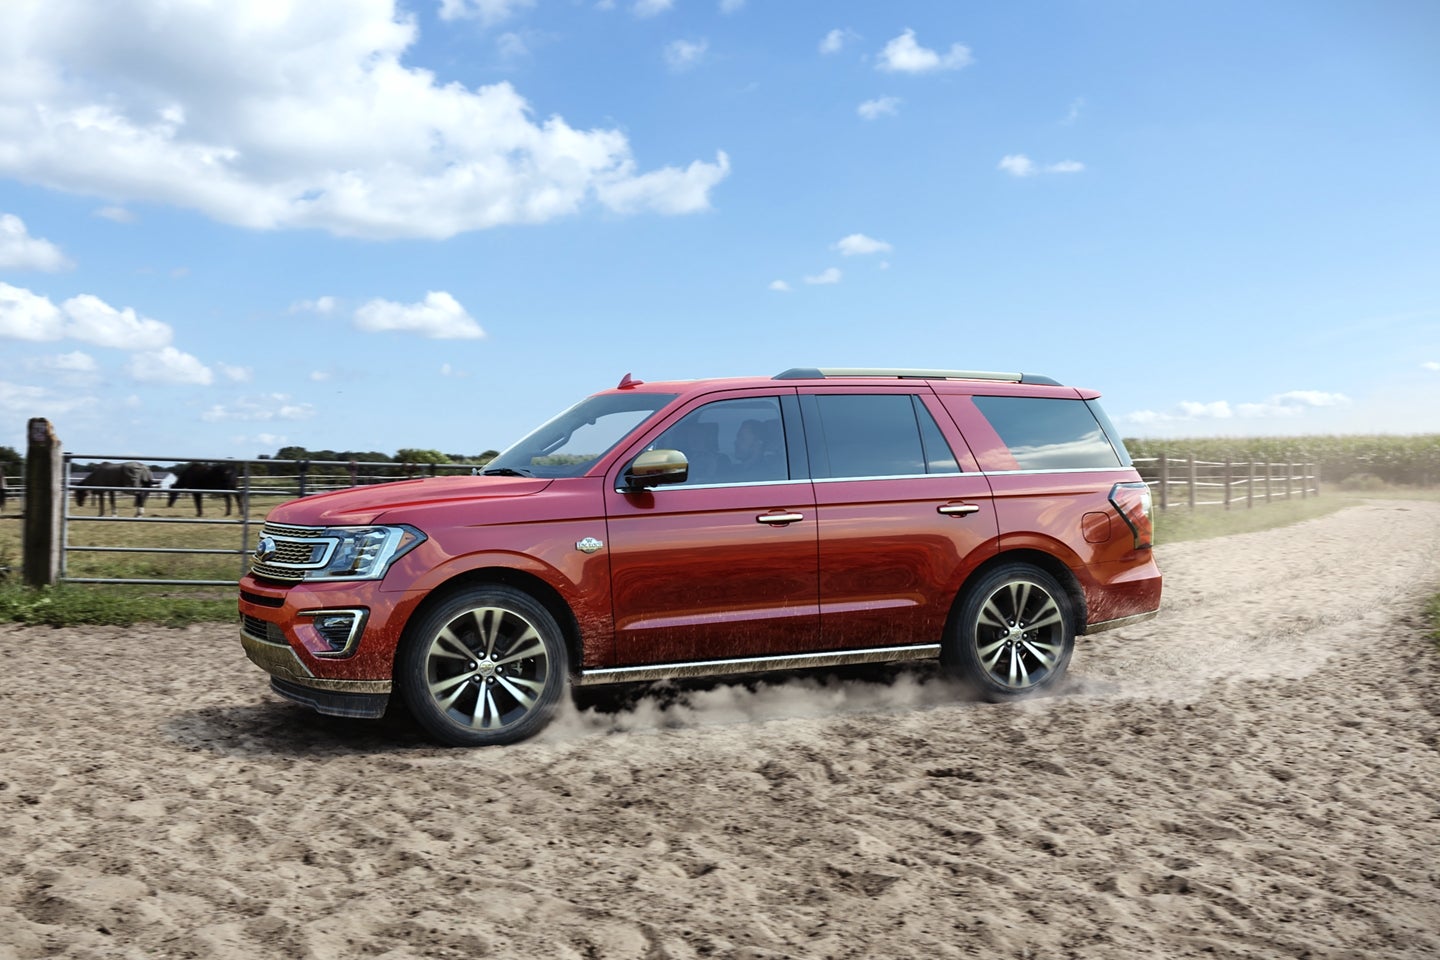 2020 Ford Expedition Lease near Dothan, AL